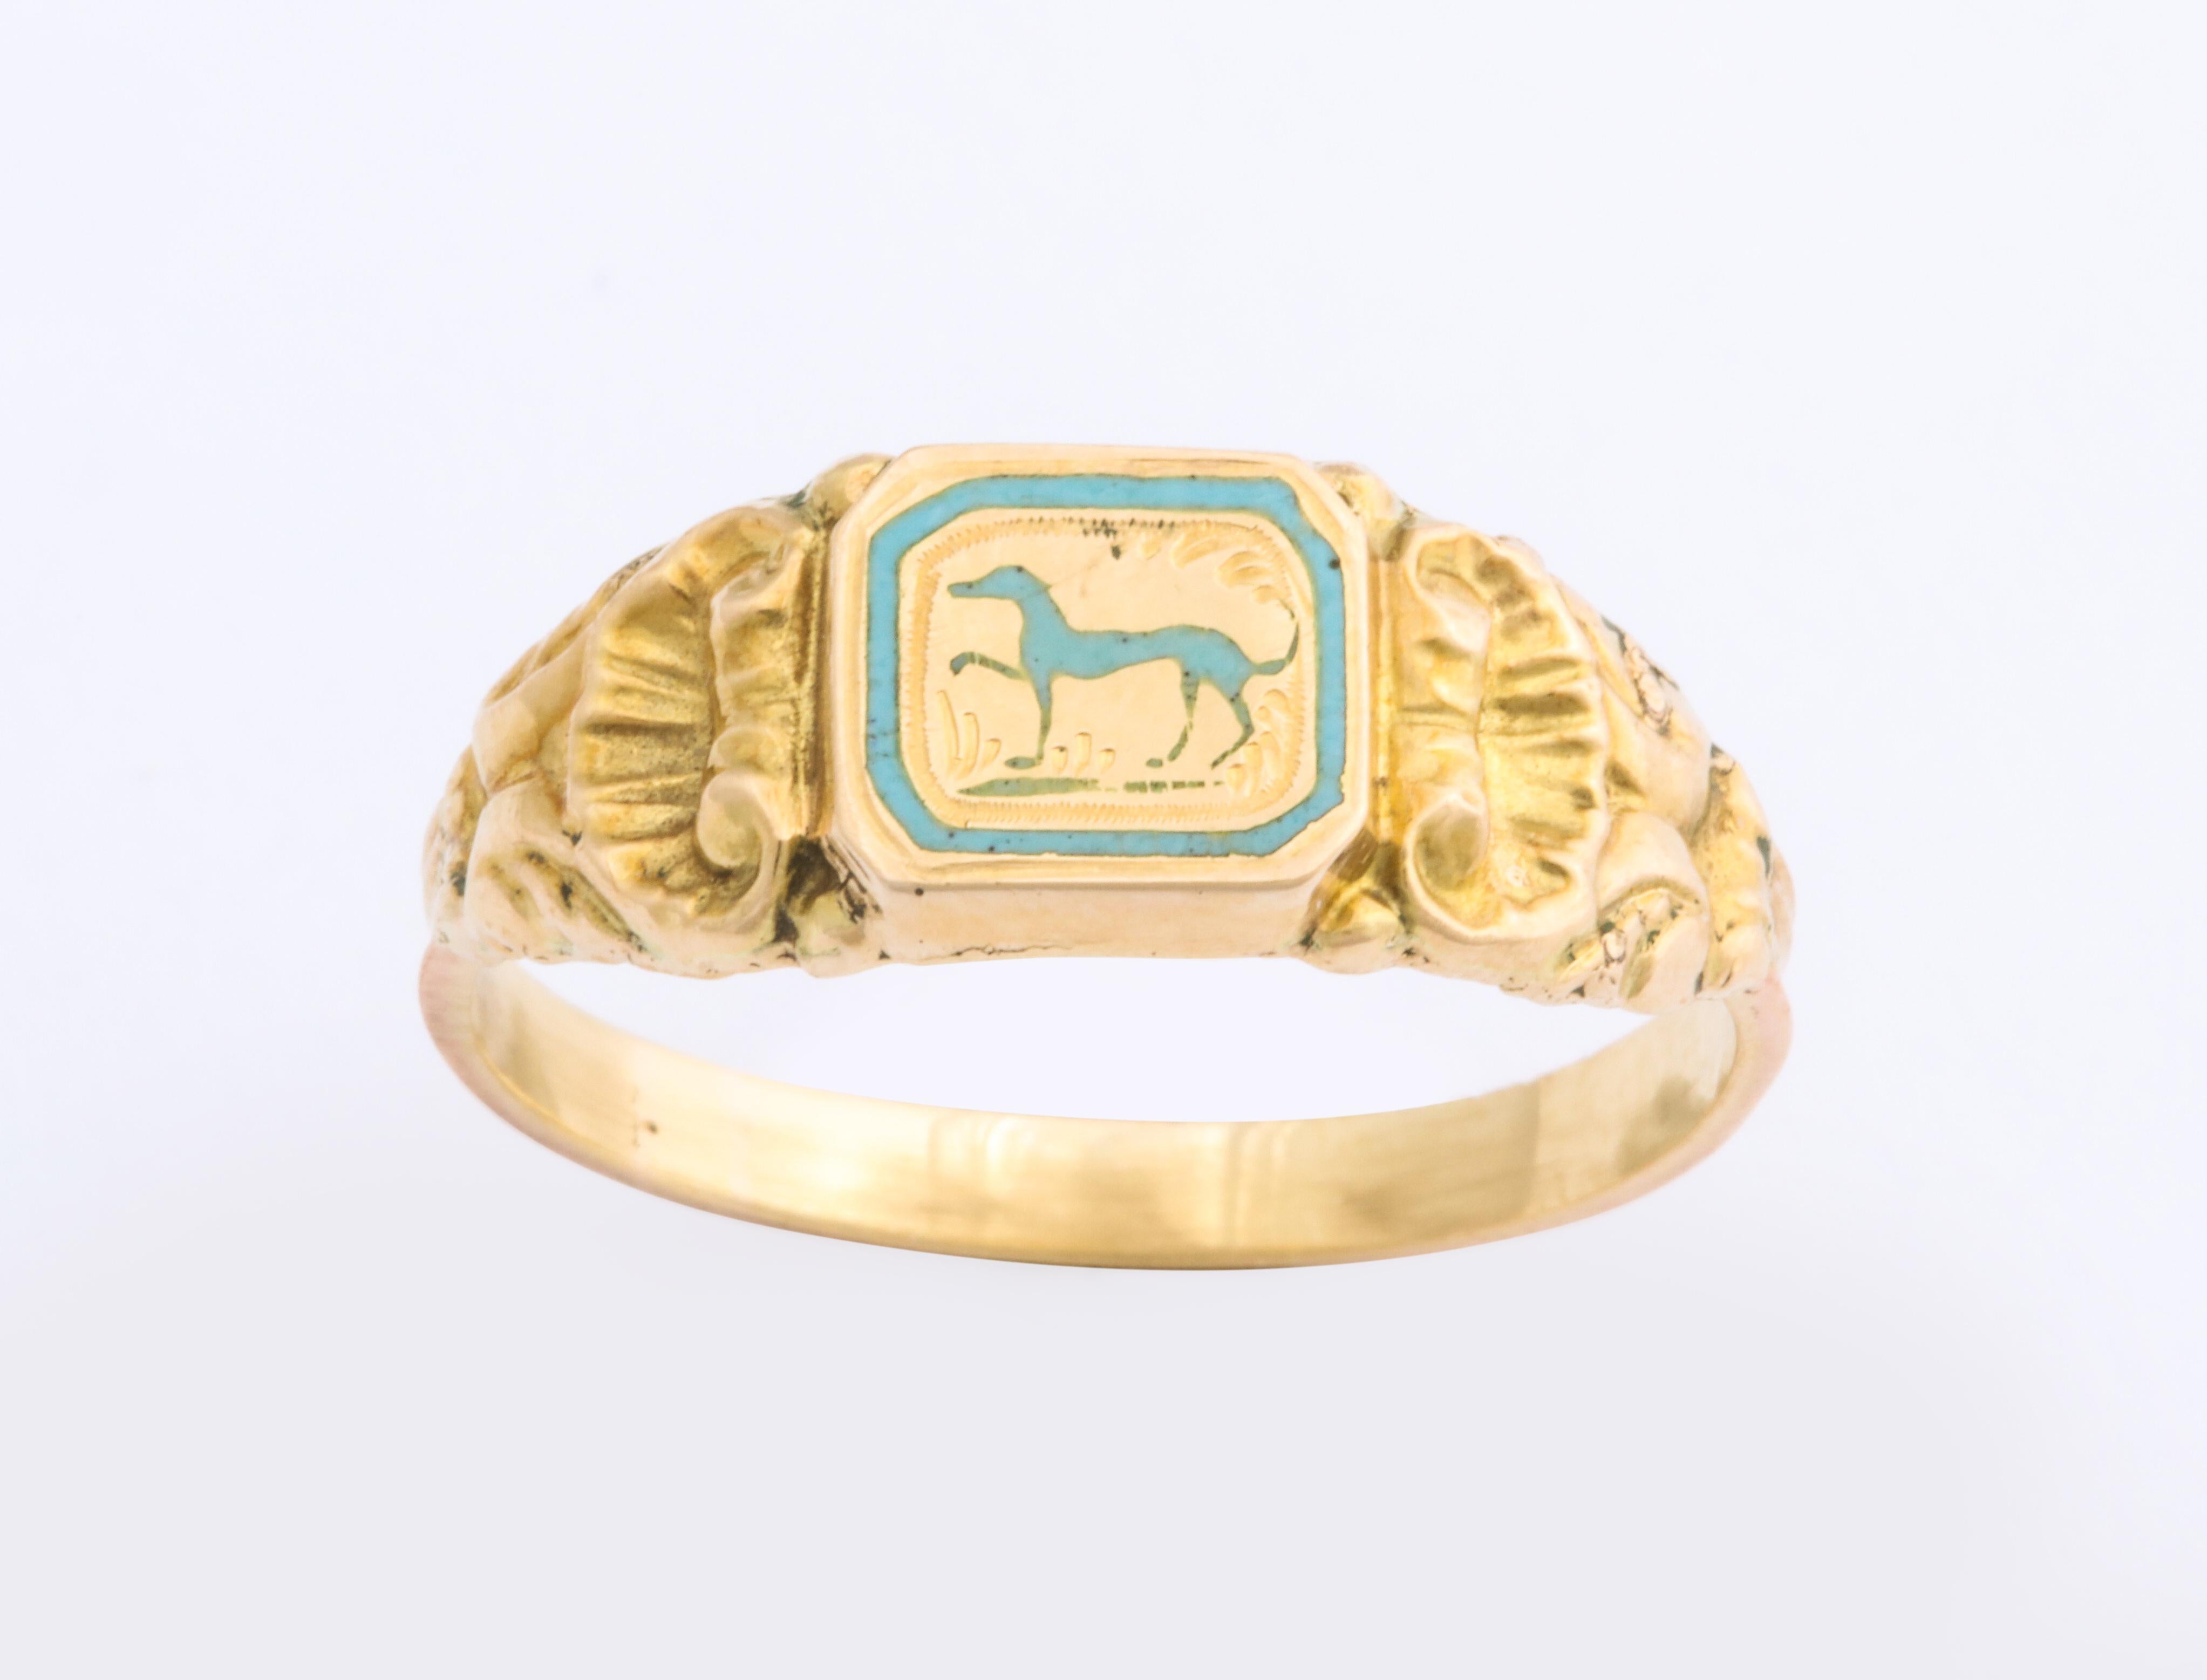 A French 18 Kt gold ring c. 1840, likely the only one ever made, depicts a greyhound or whippet in pale aqua with one leg gracefully raised in a prance. and head erect. The dog is bordered by an aqua frame that strengthens the design. Engraved marks